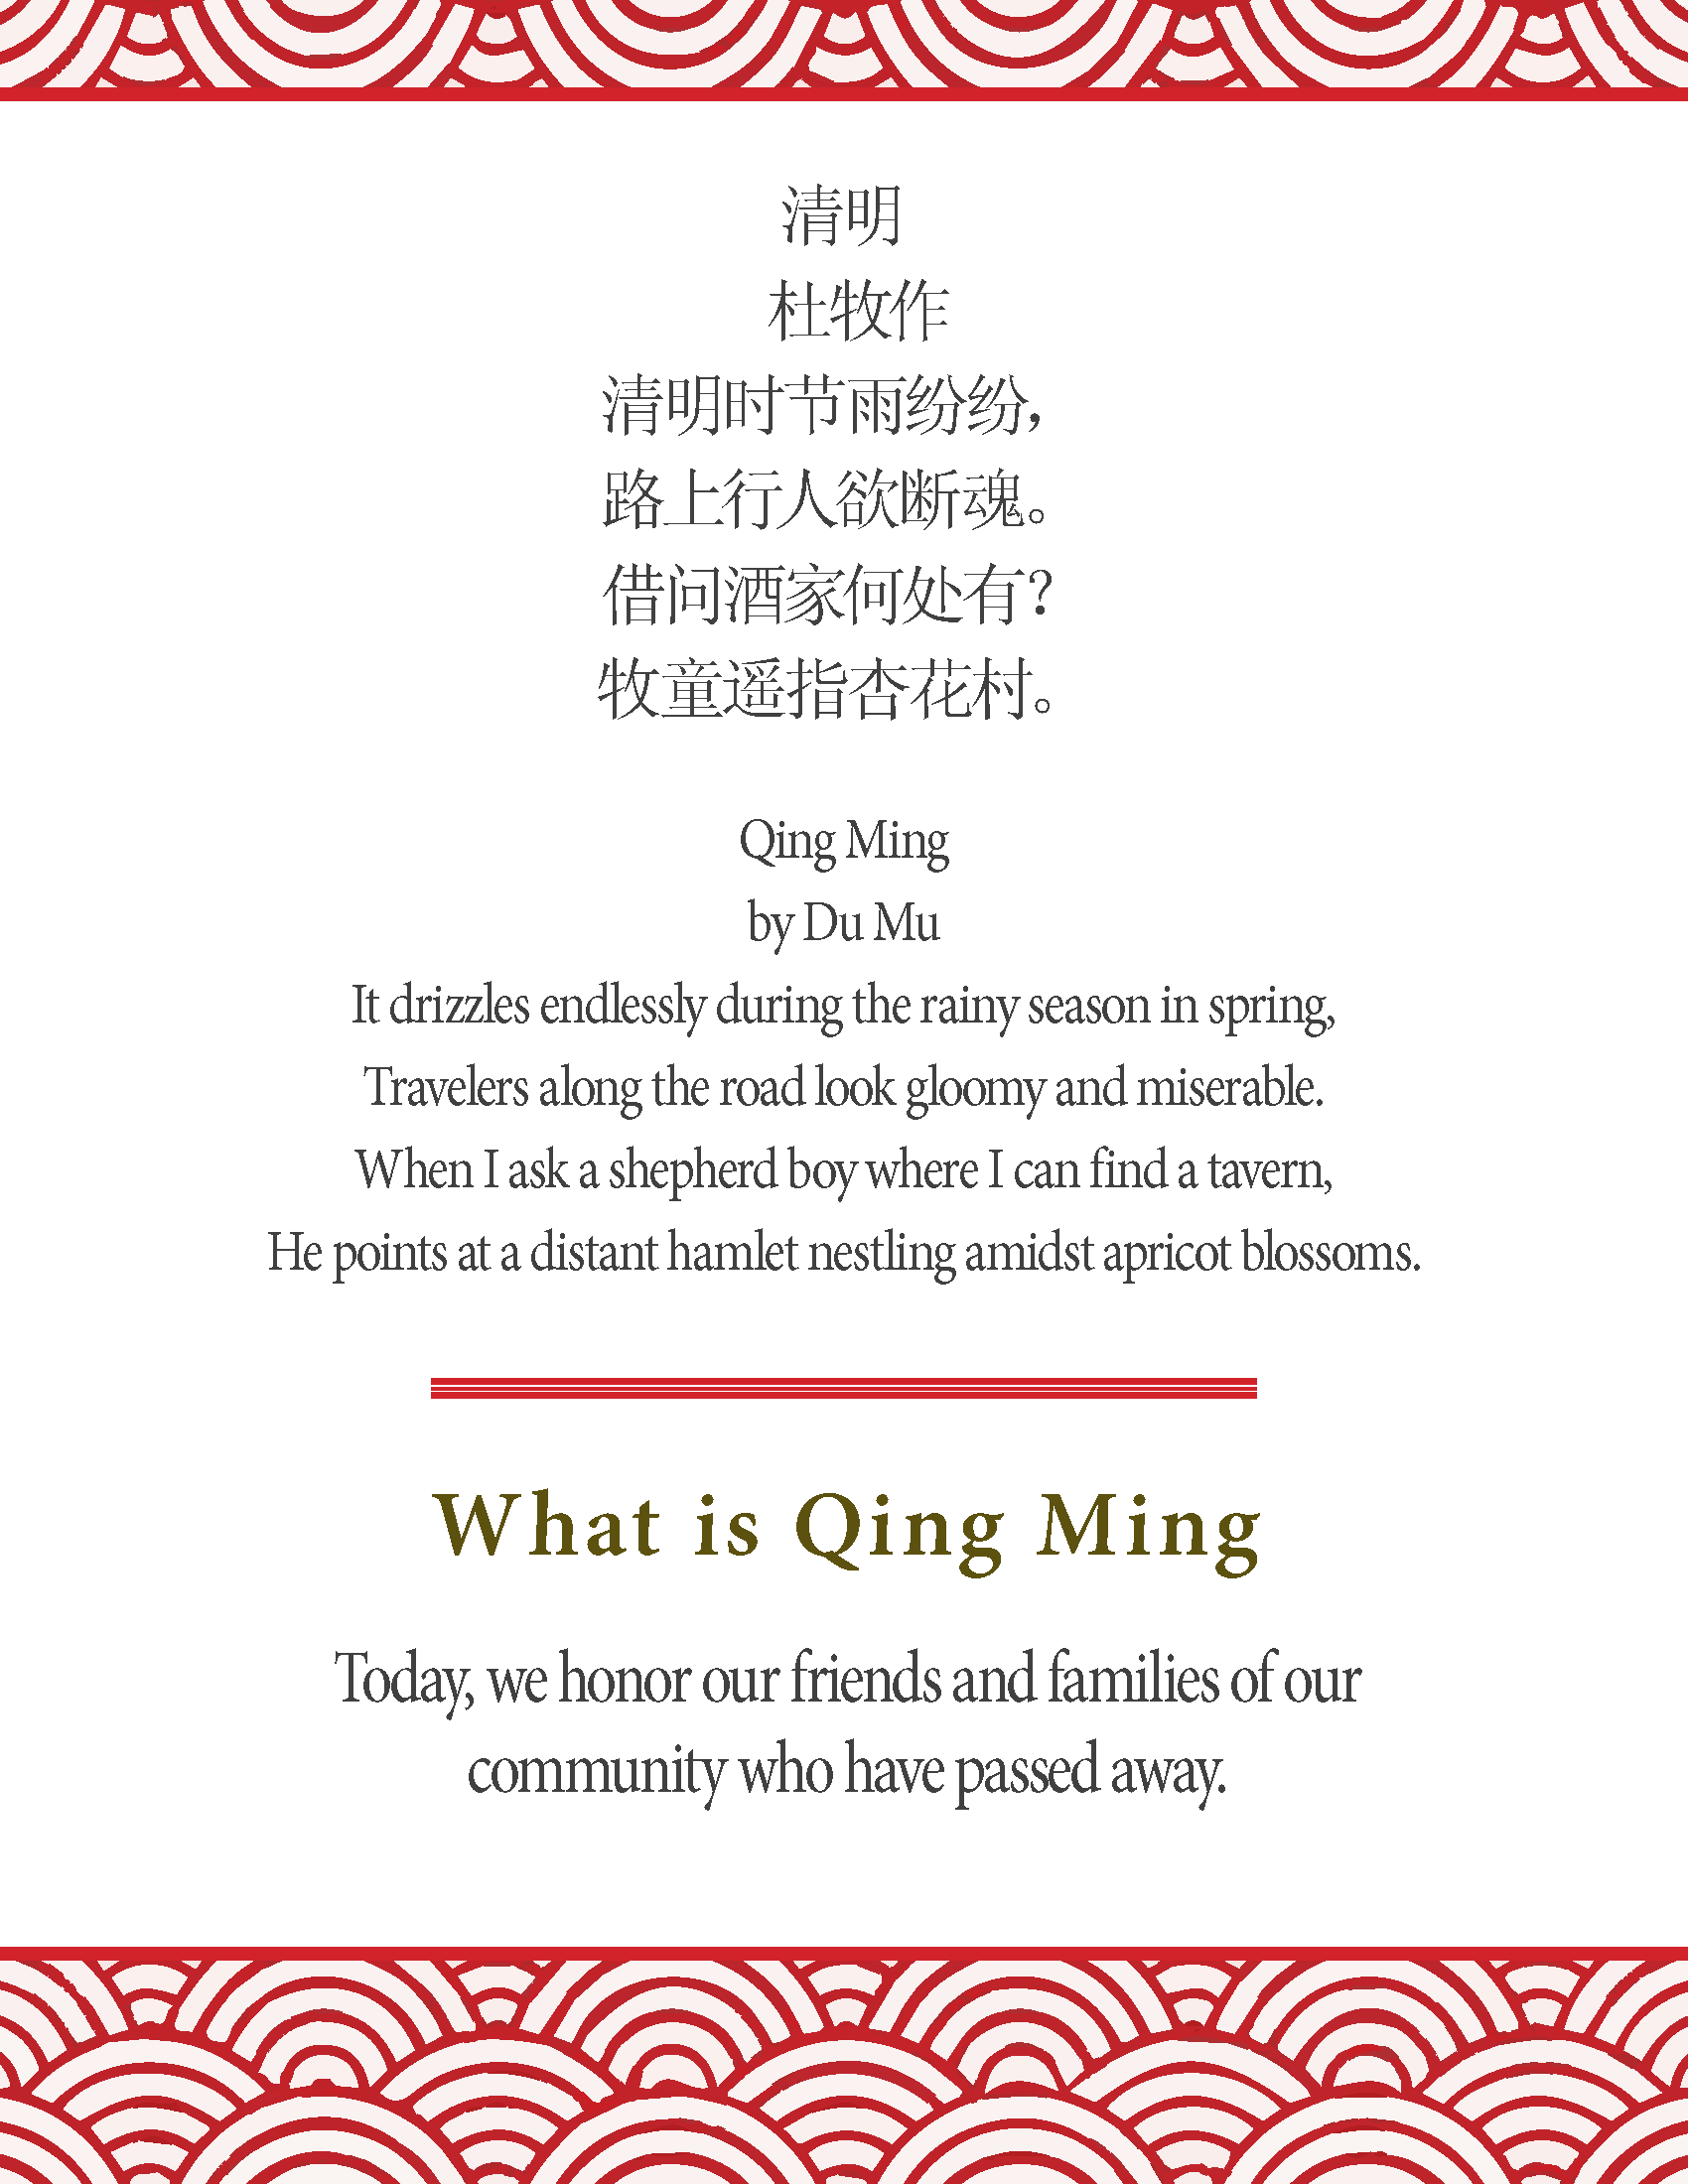 TCCC_ChingMing_Booklet_2022 - 3.28.22 0407_Page_05.png